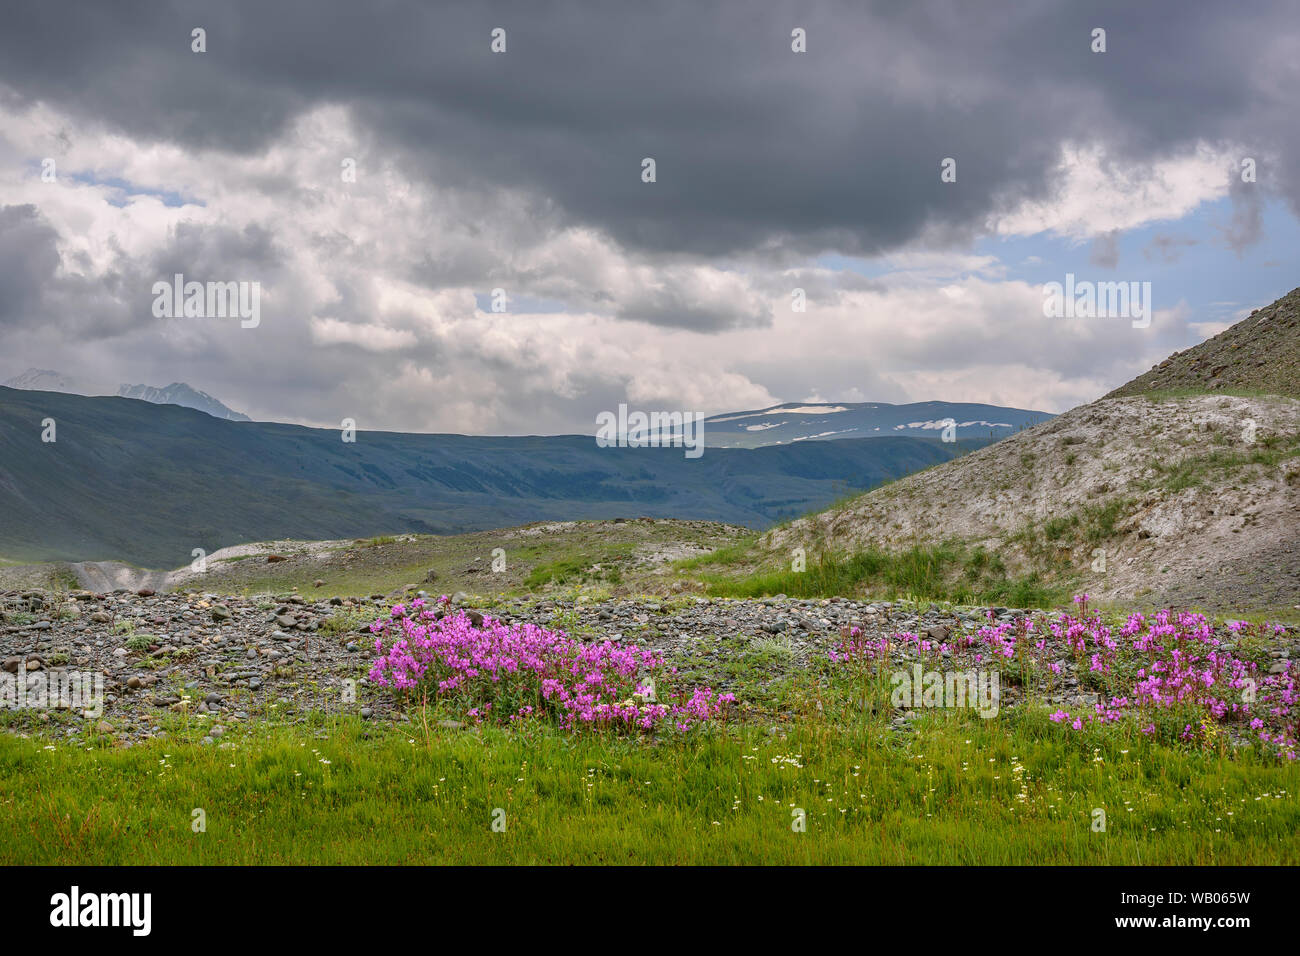 Bright pink flowers of willow-tea (Ivan-tea, Chamaenerion) on rocks on the background of snowy mountains and thunderclouds in the sky Stock Photo